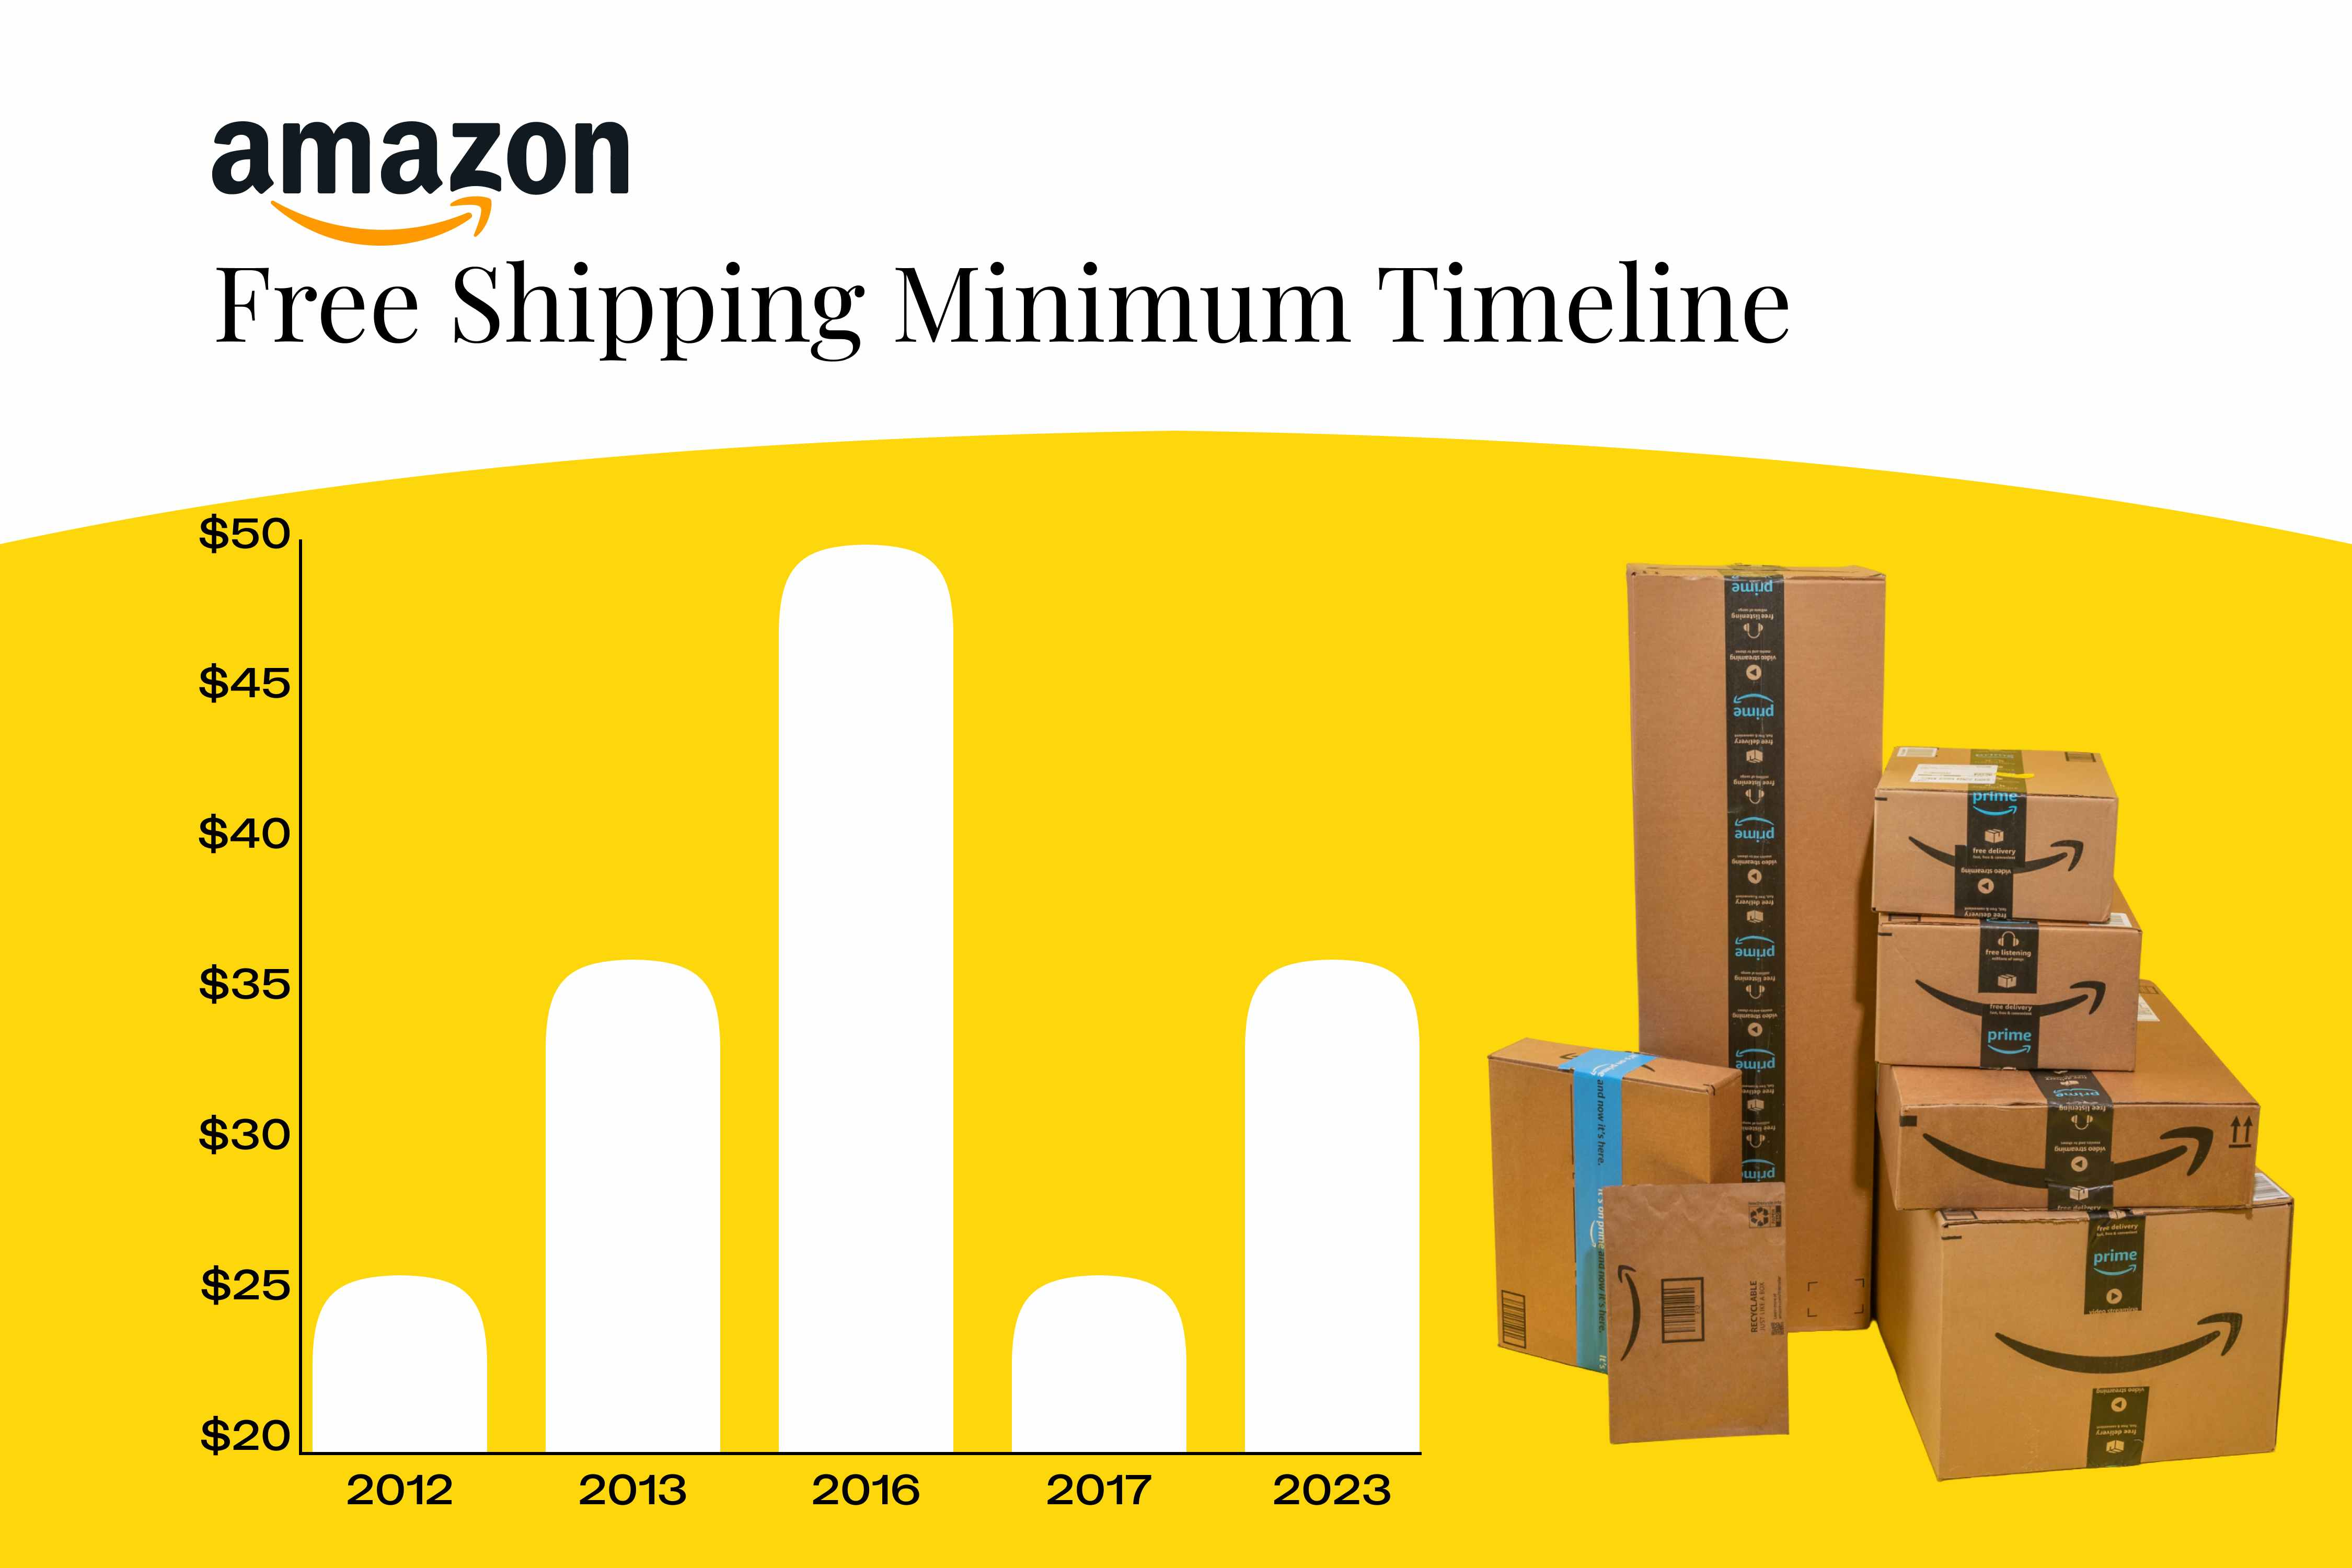 hikes free shipping minimum to $35 for some users without Prime